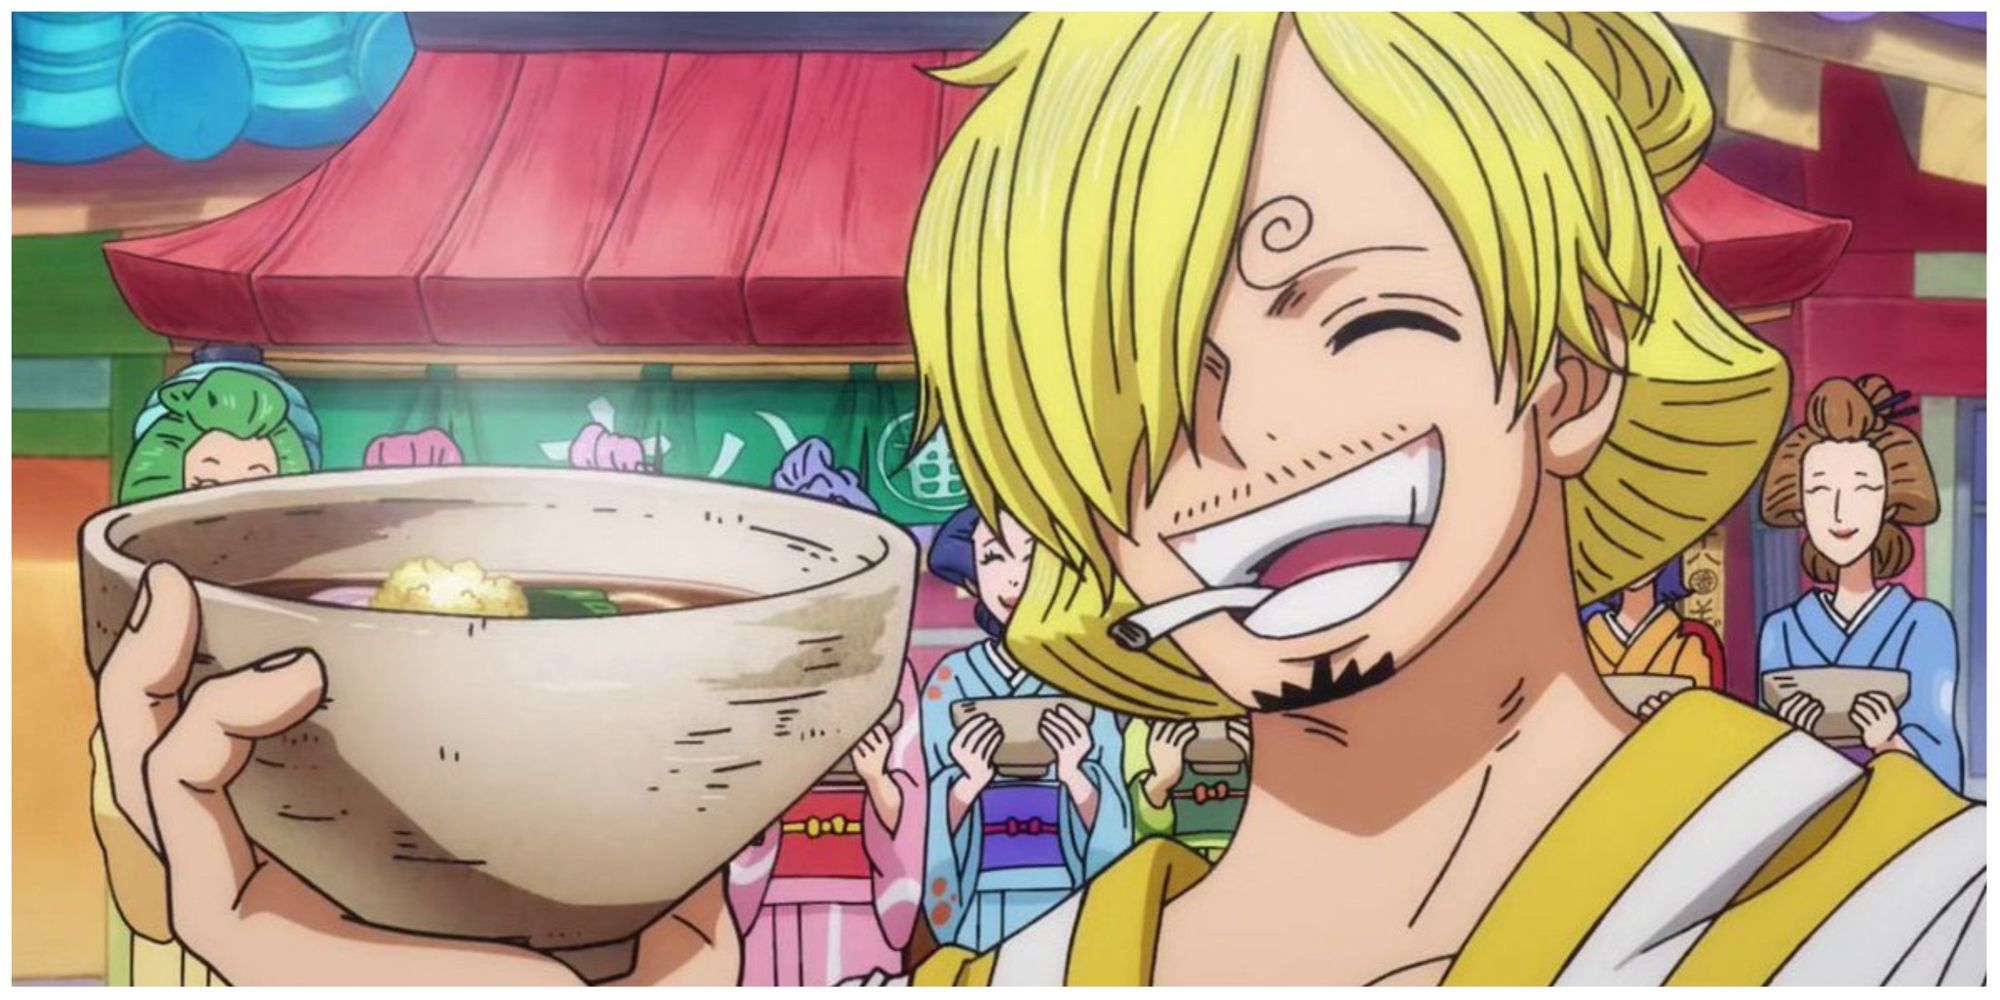 Sanji’s soba shop from One Piece.